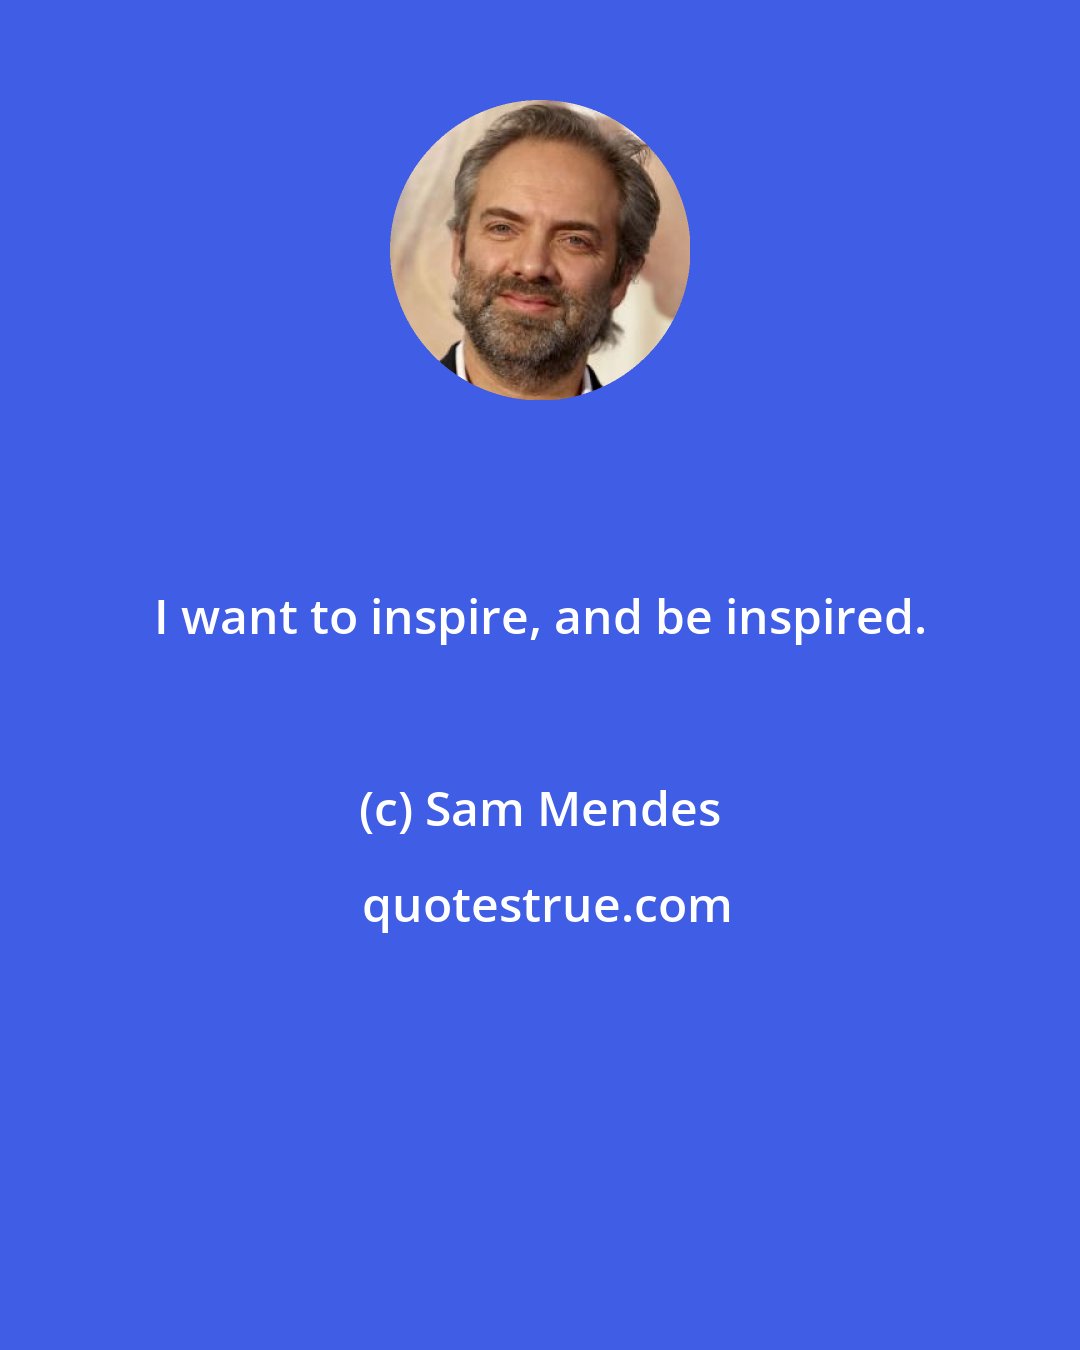 Sam Mendes: I want to inspire, and be inspired.